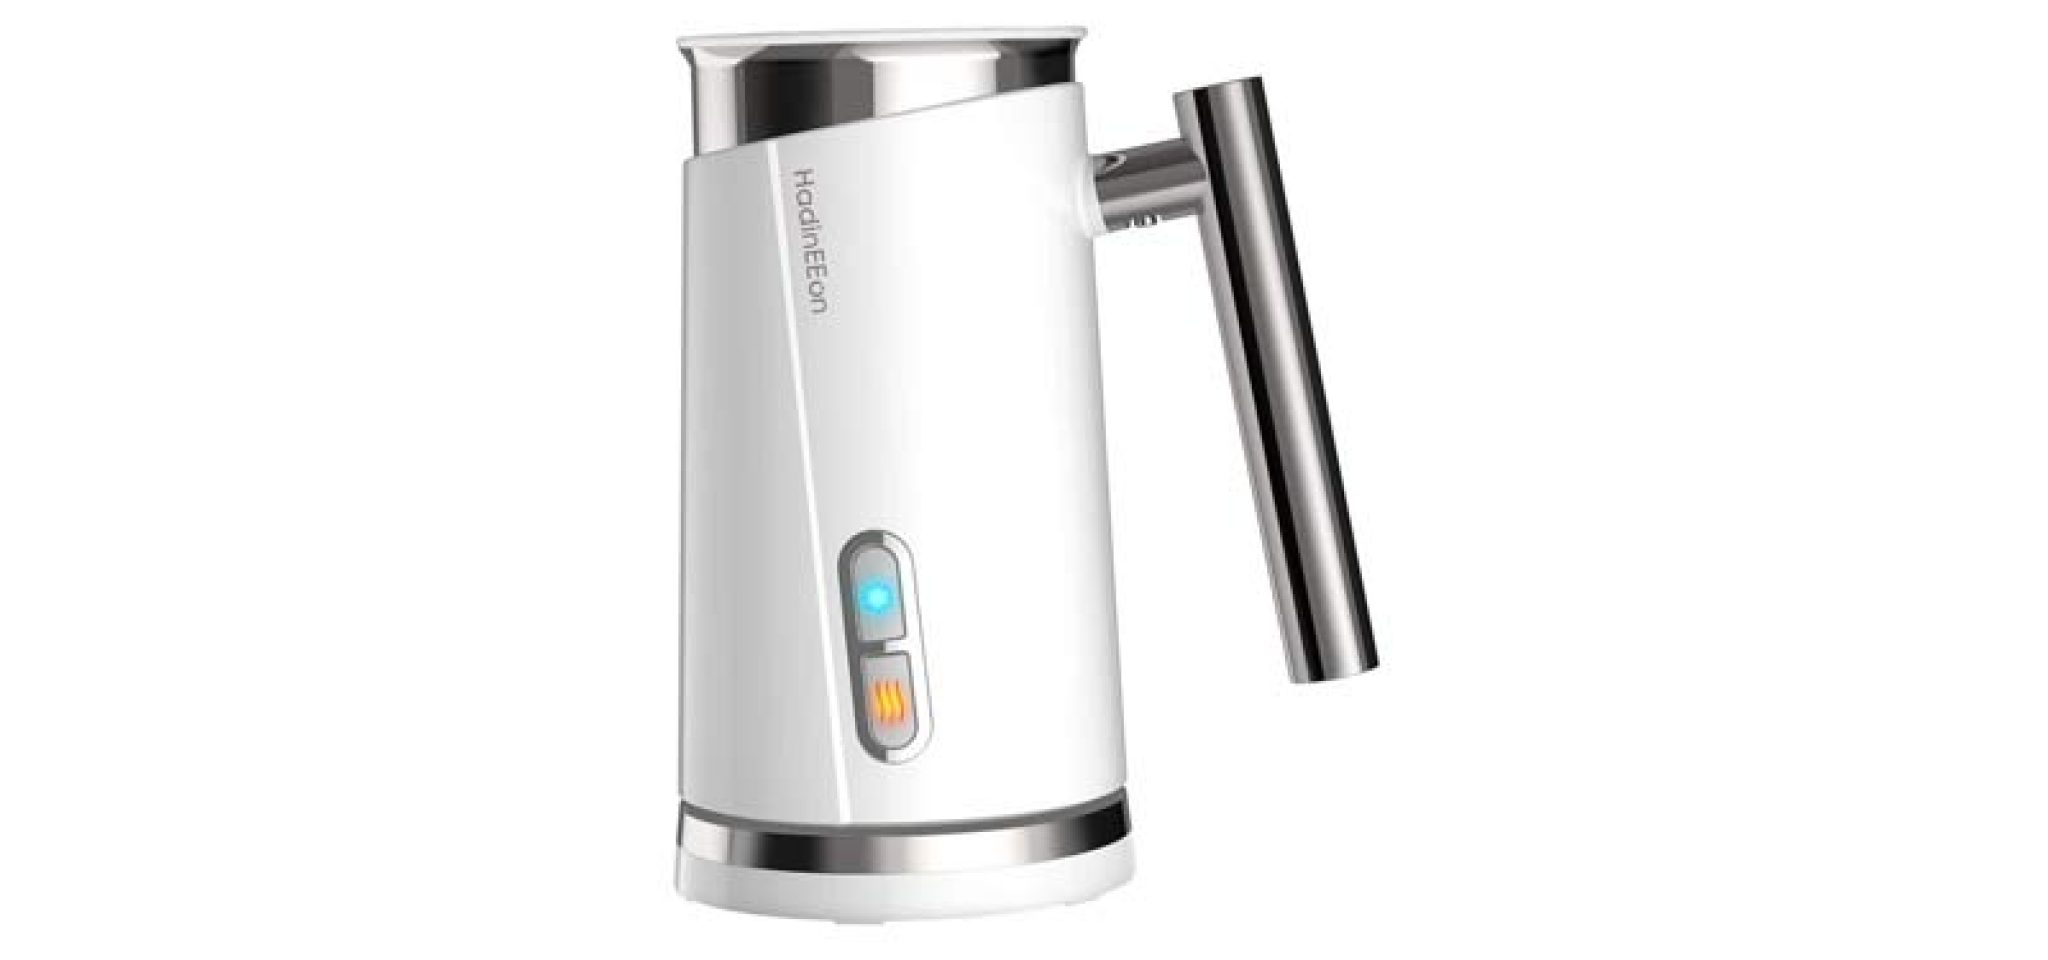 Secura Automatic Electric Milk Frother and Warmer 250ml FREE cleaning brush